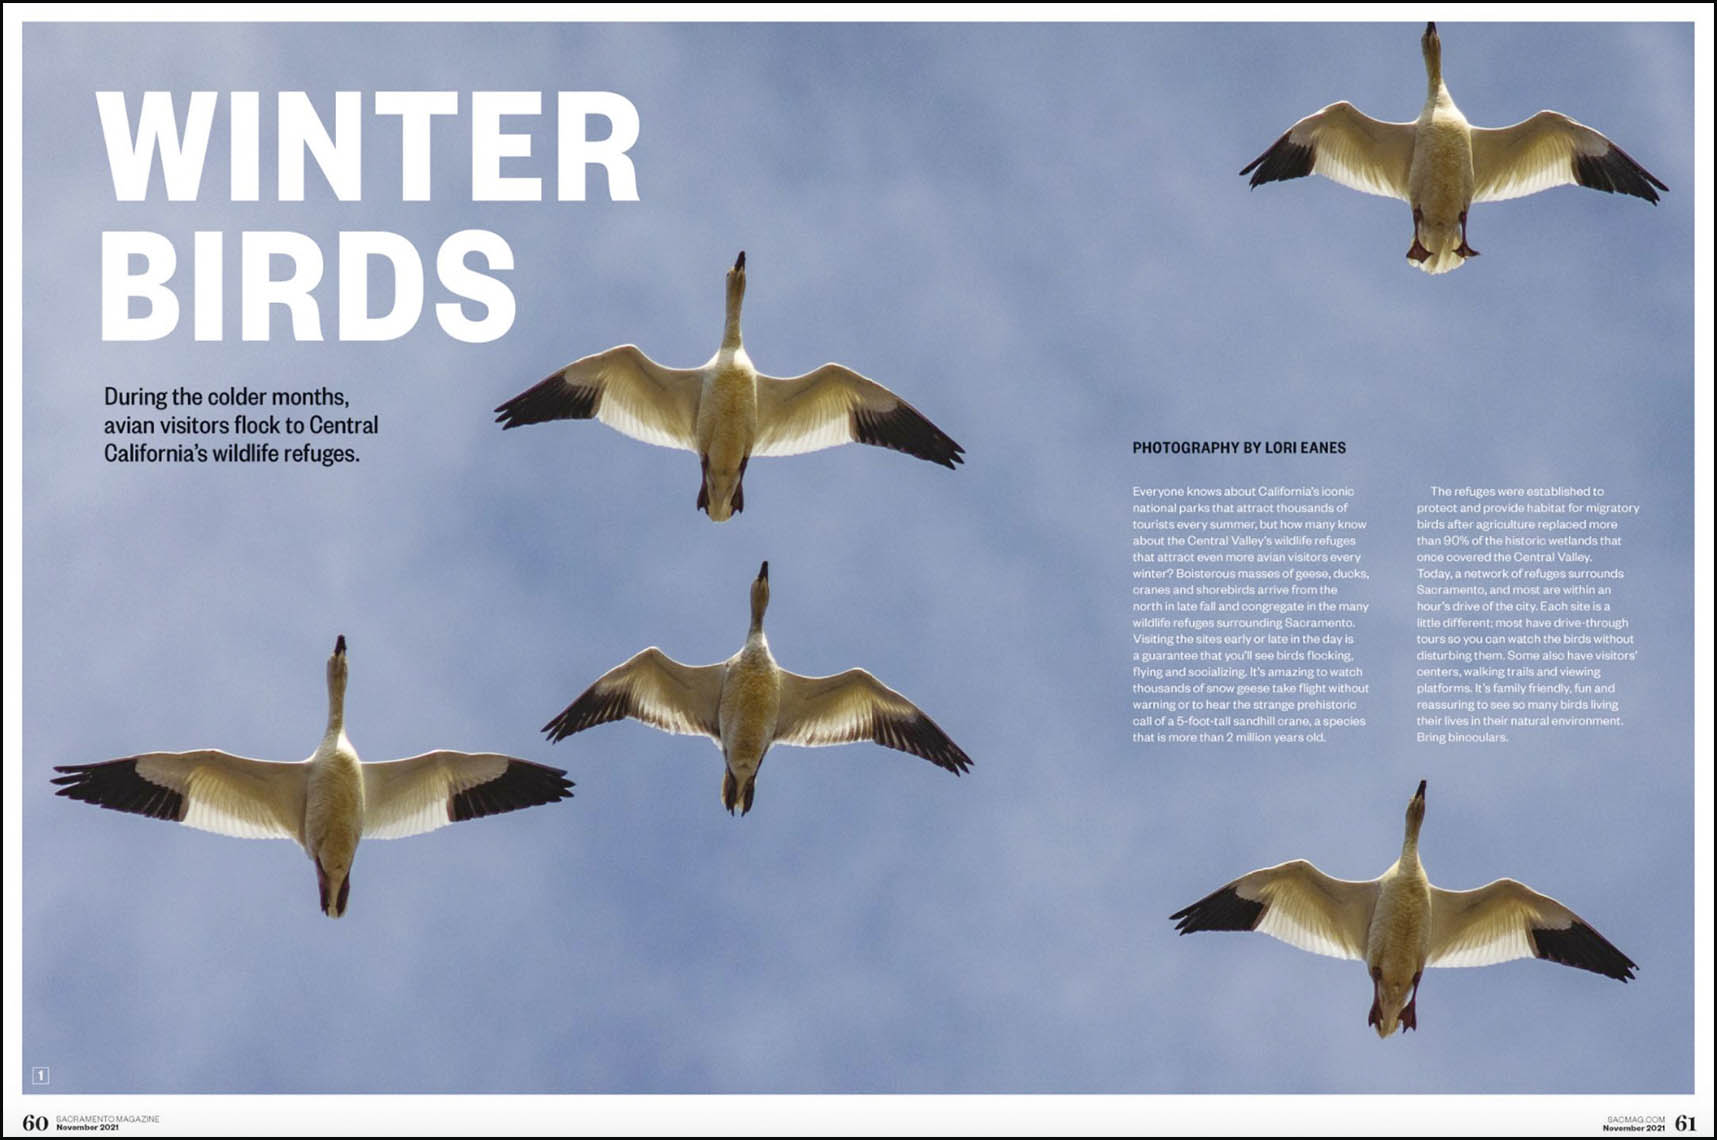 Snow geese double page spread in Sacramento Magazine, Fall 2021 issue.